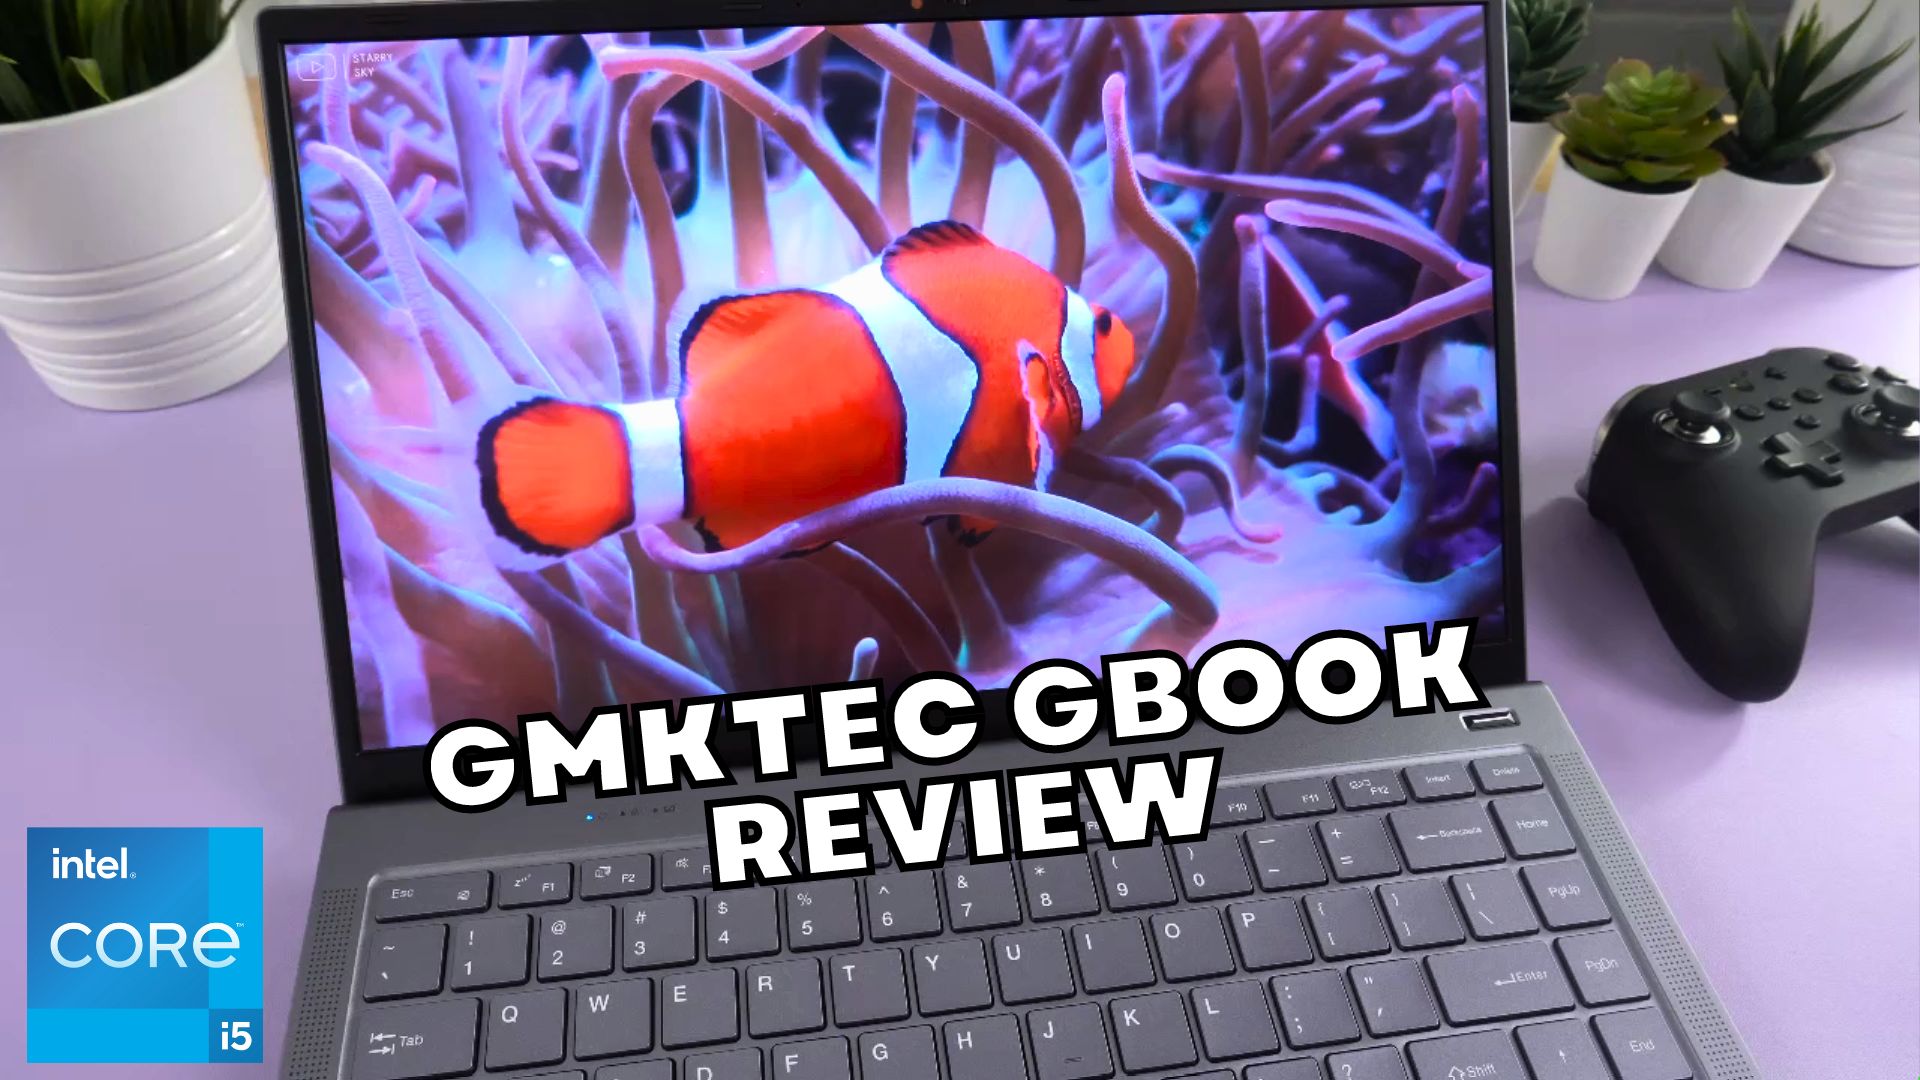 GMKTec Gbook Review with video- The laptop for home and office work you need